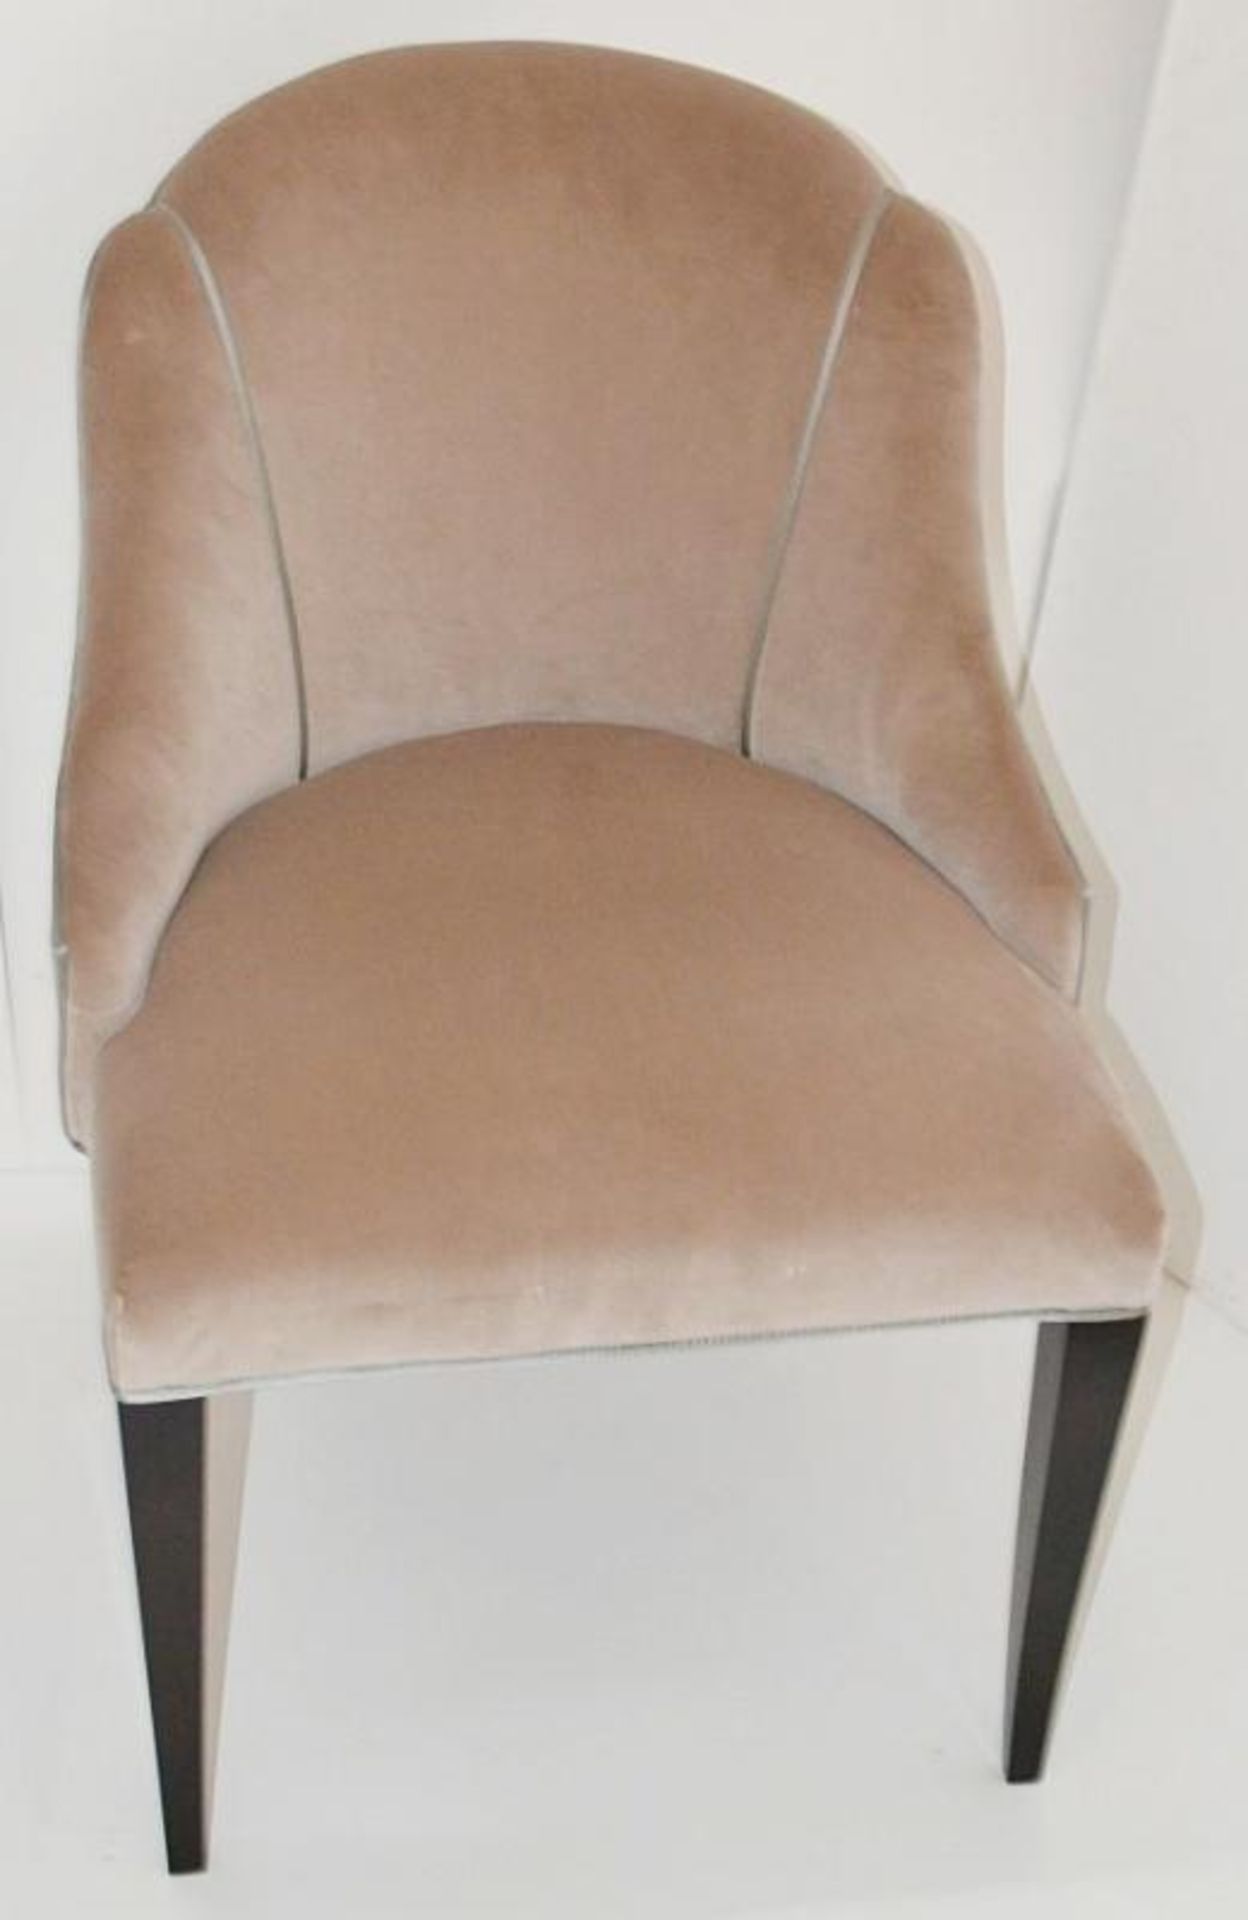 1 x REED &amp; RACKSTRAW "Cloud" Handcrafted Velvet Upholstered Chair - Dimensions: H87 x W58 x D5 - Image 11 of 14